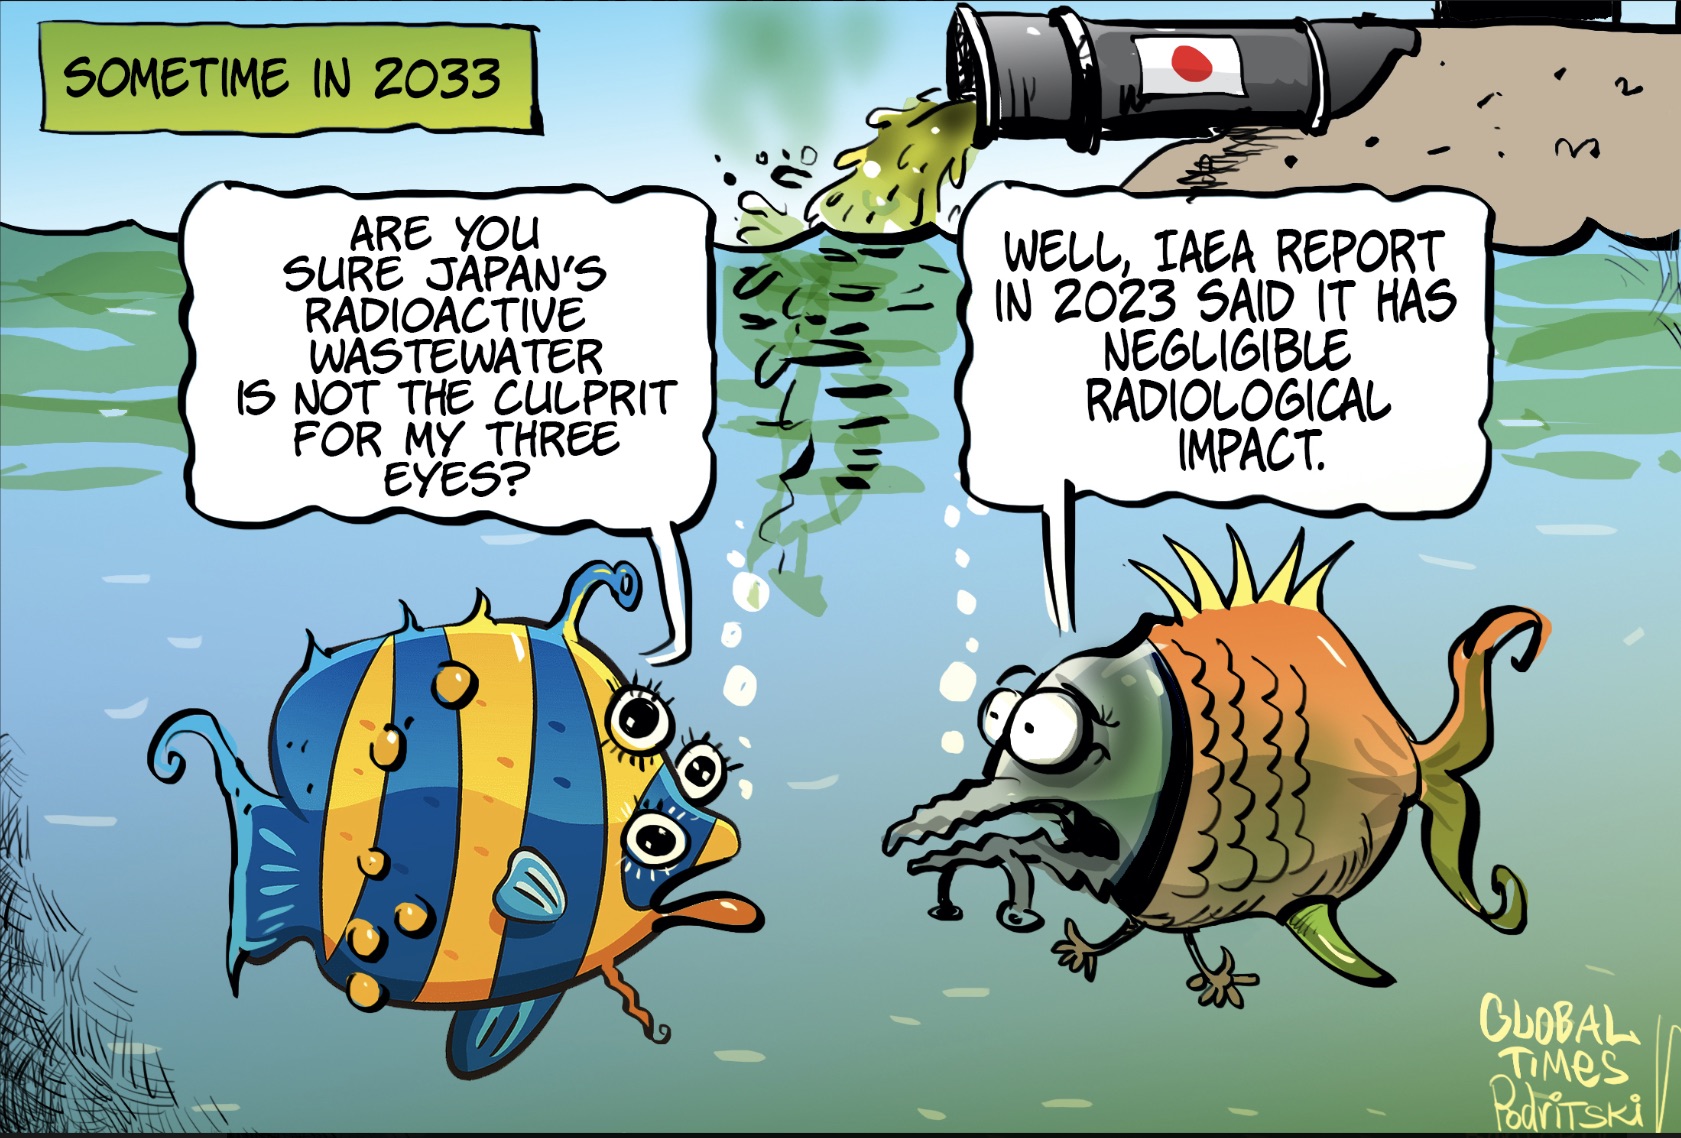 Radioactive seafood after Japan releases radioactive wastewater into the Pacific